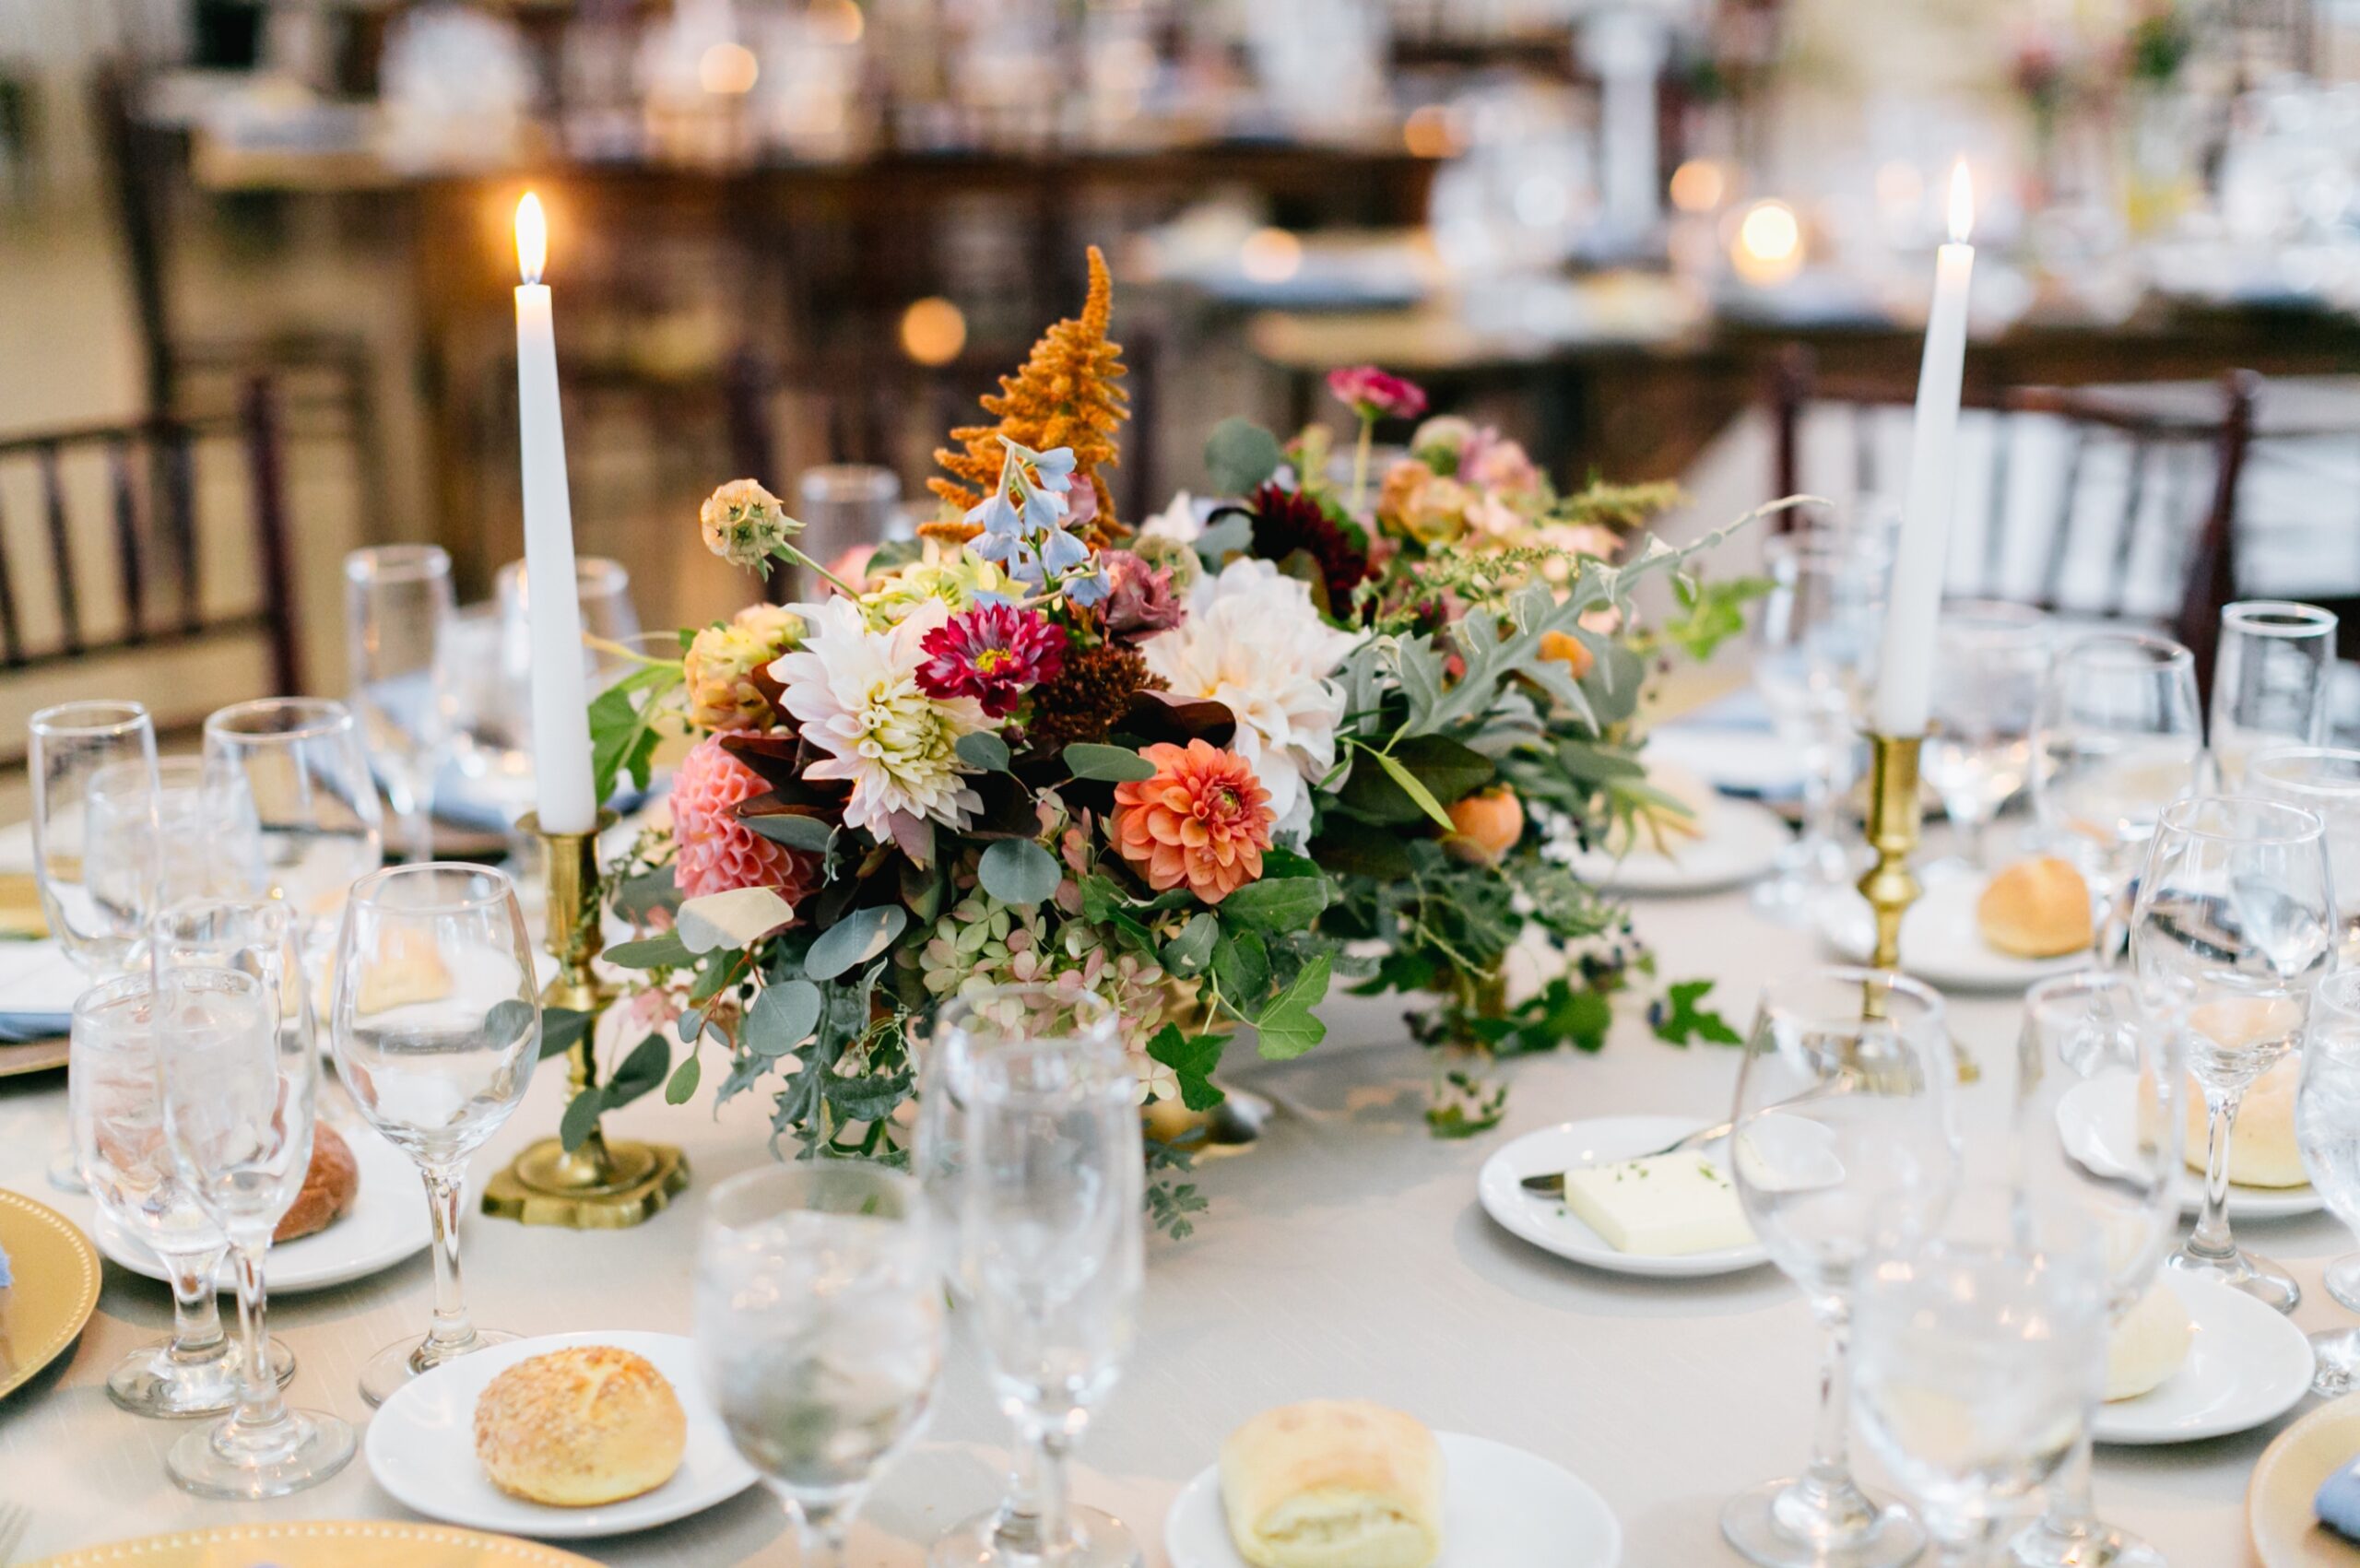 Low table centerpiece with bright flowers and candles